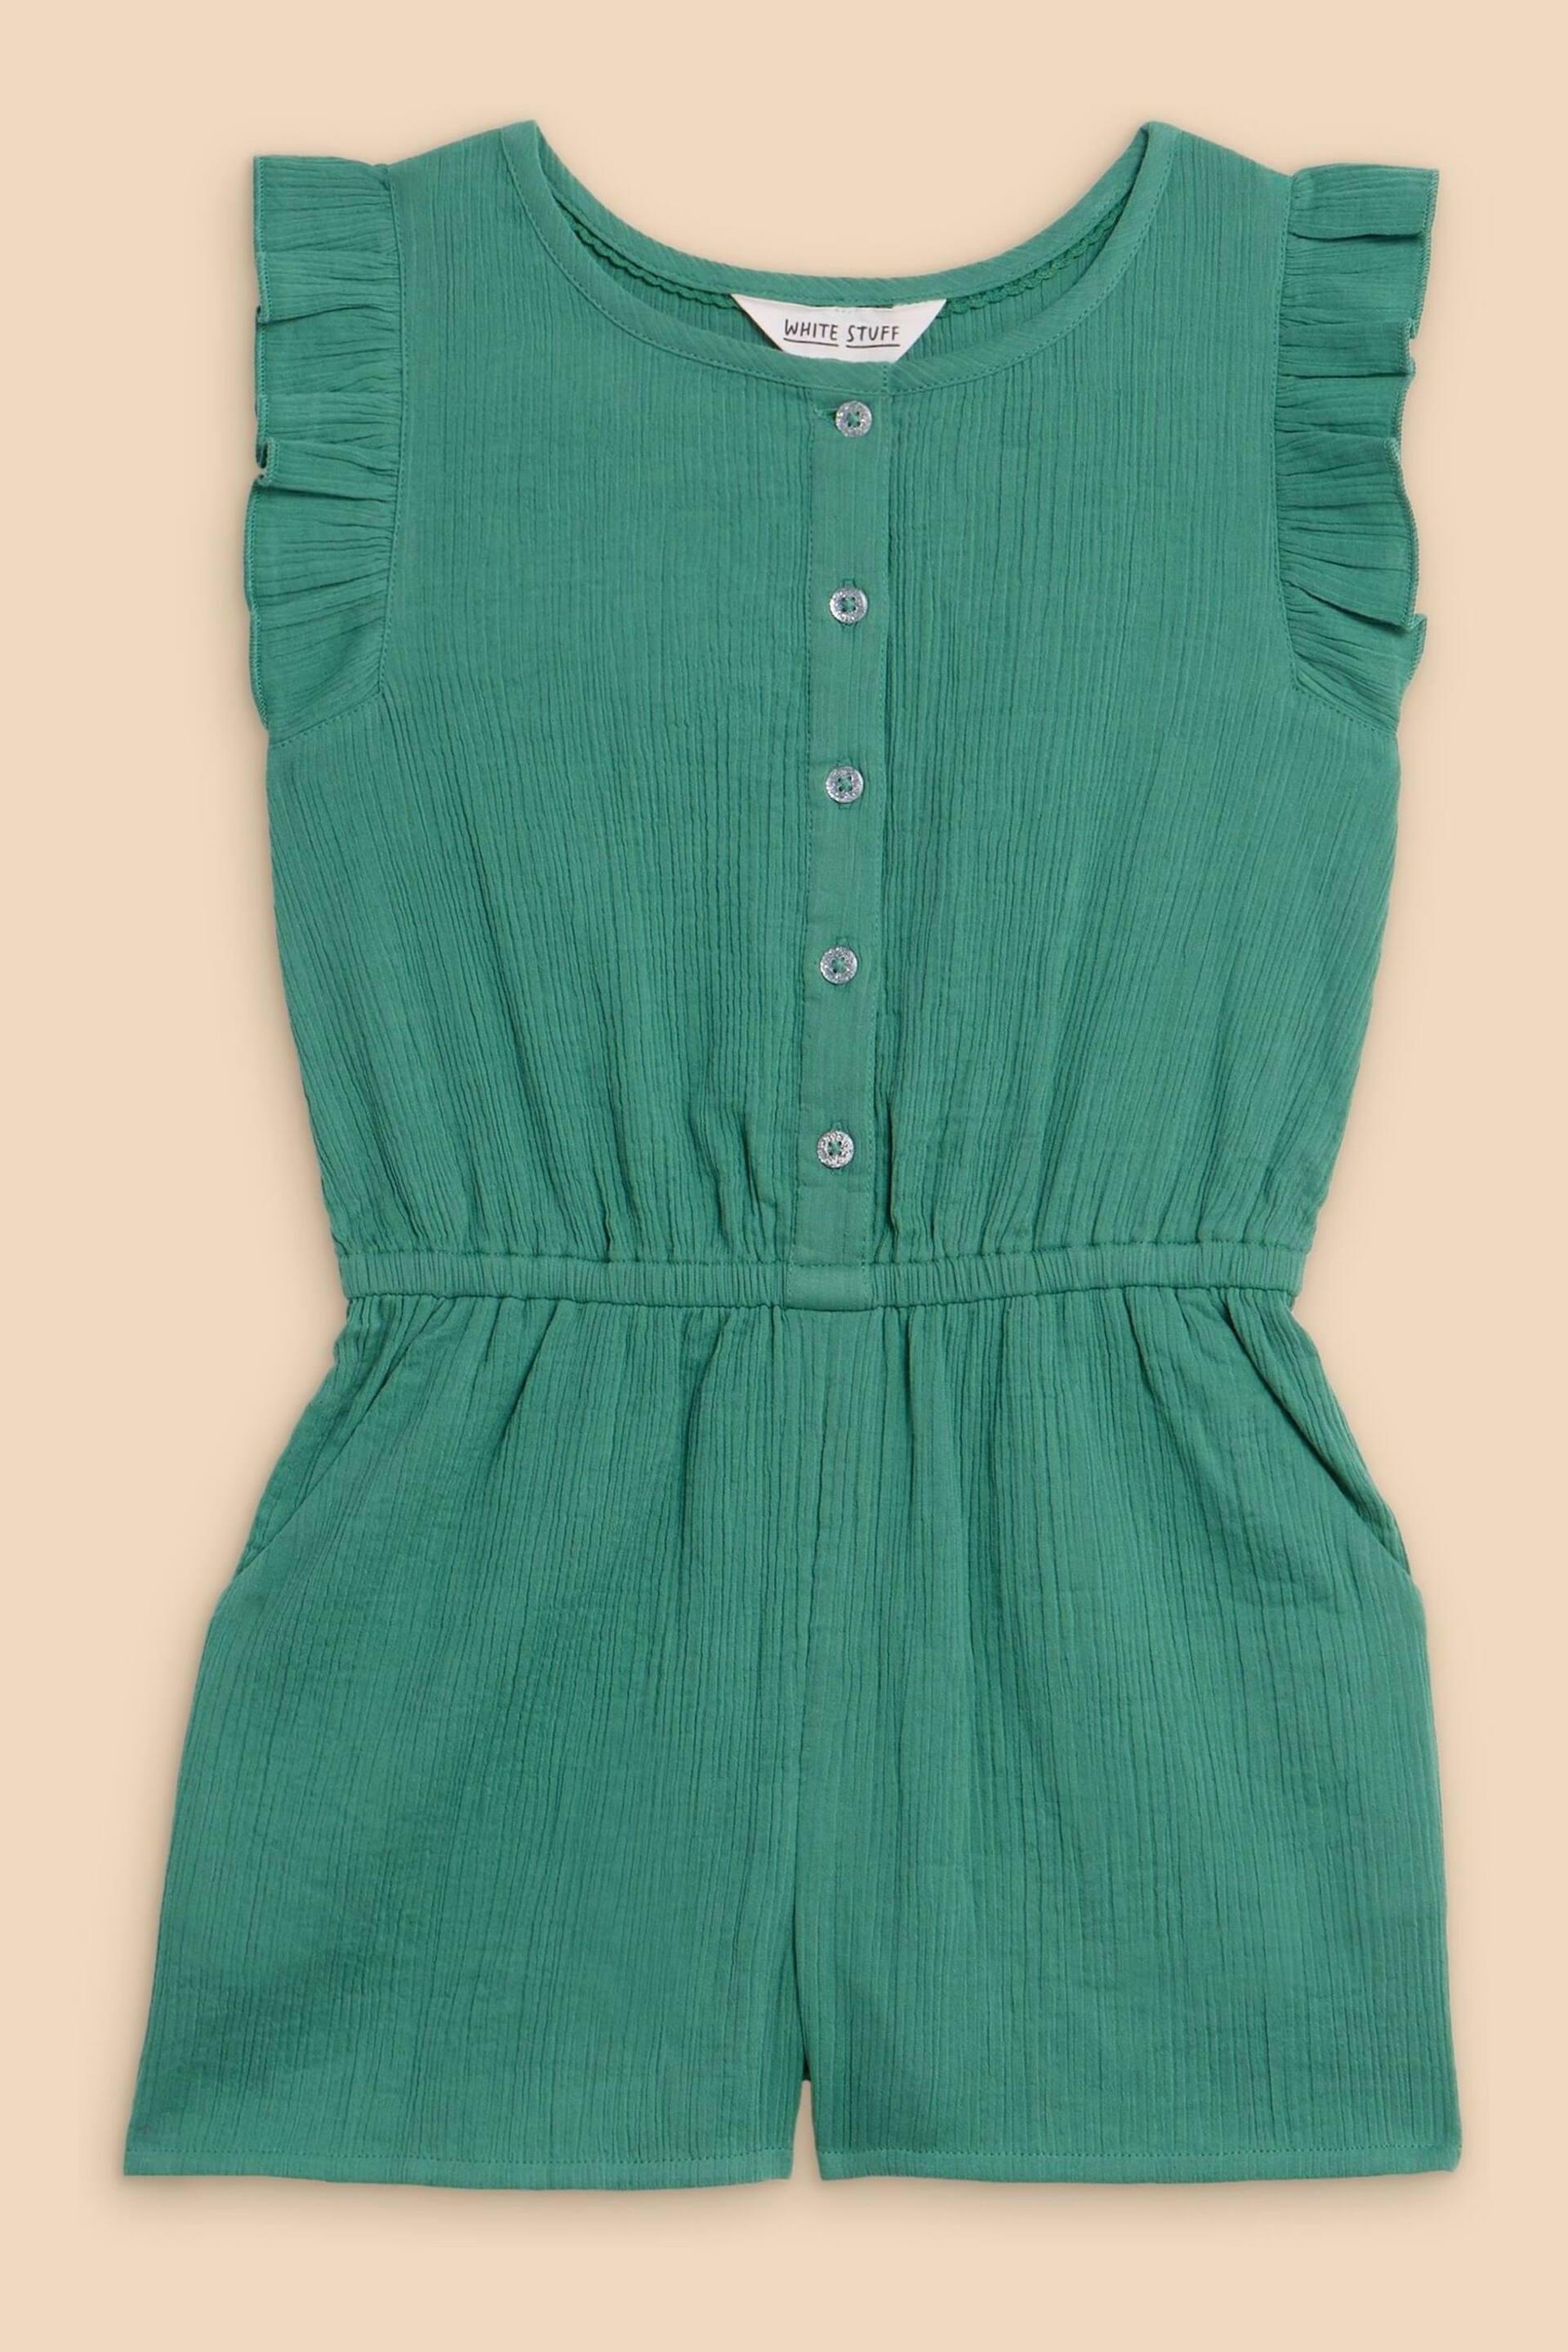 White Stuff Green Woven Frill Playsuit - Image 1 of 3